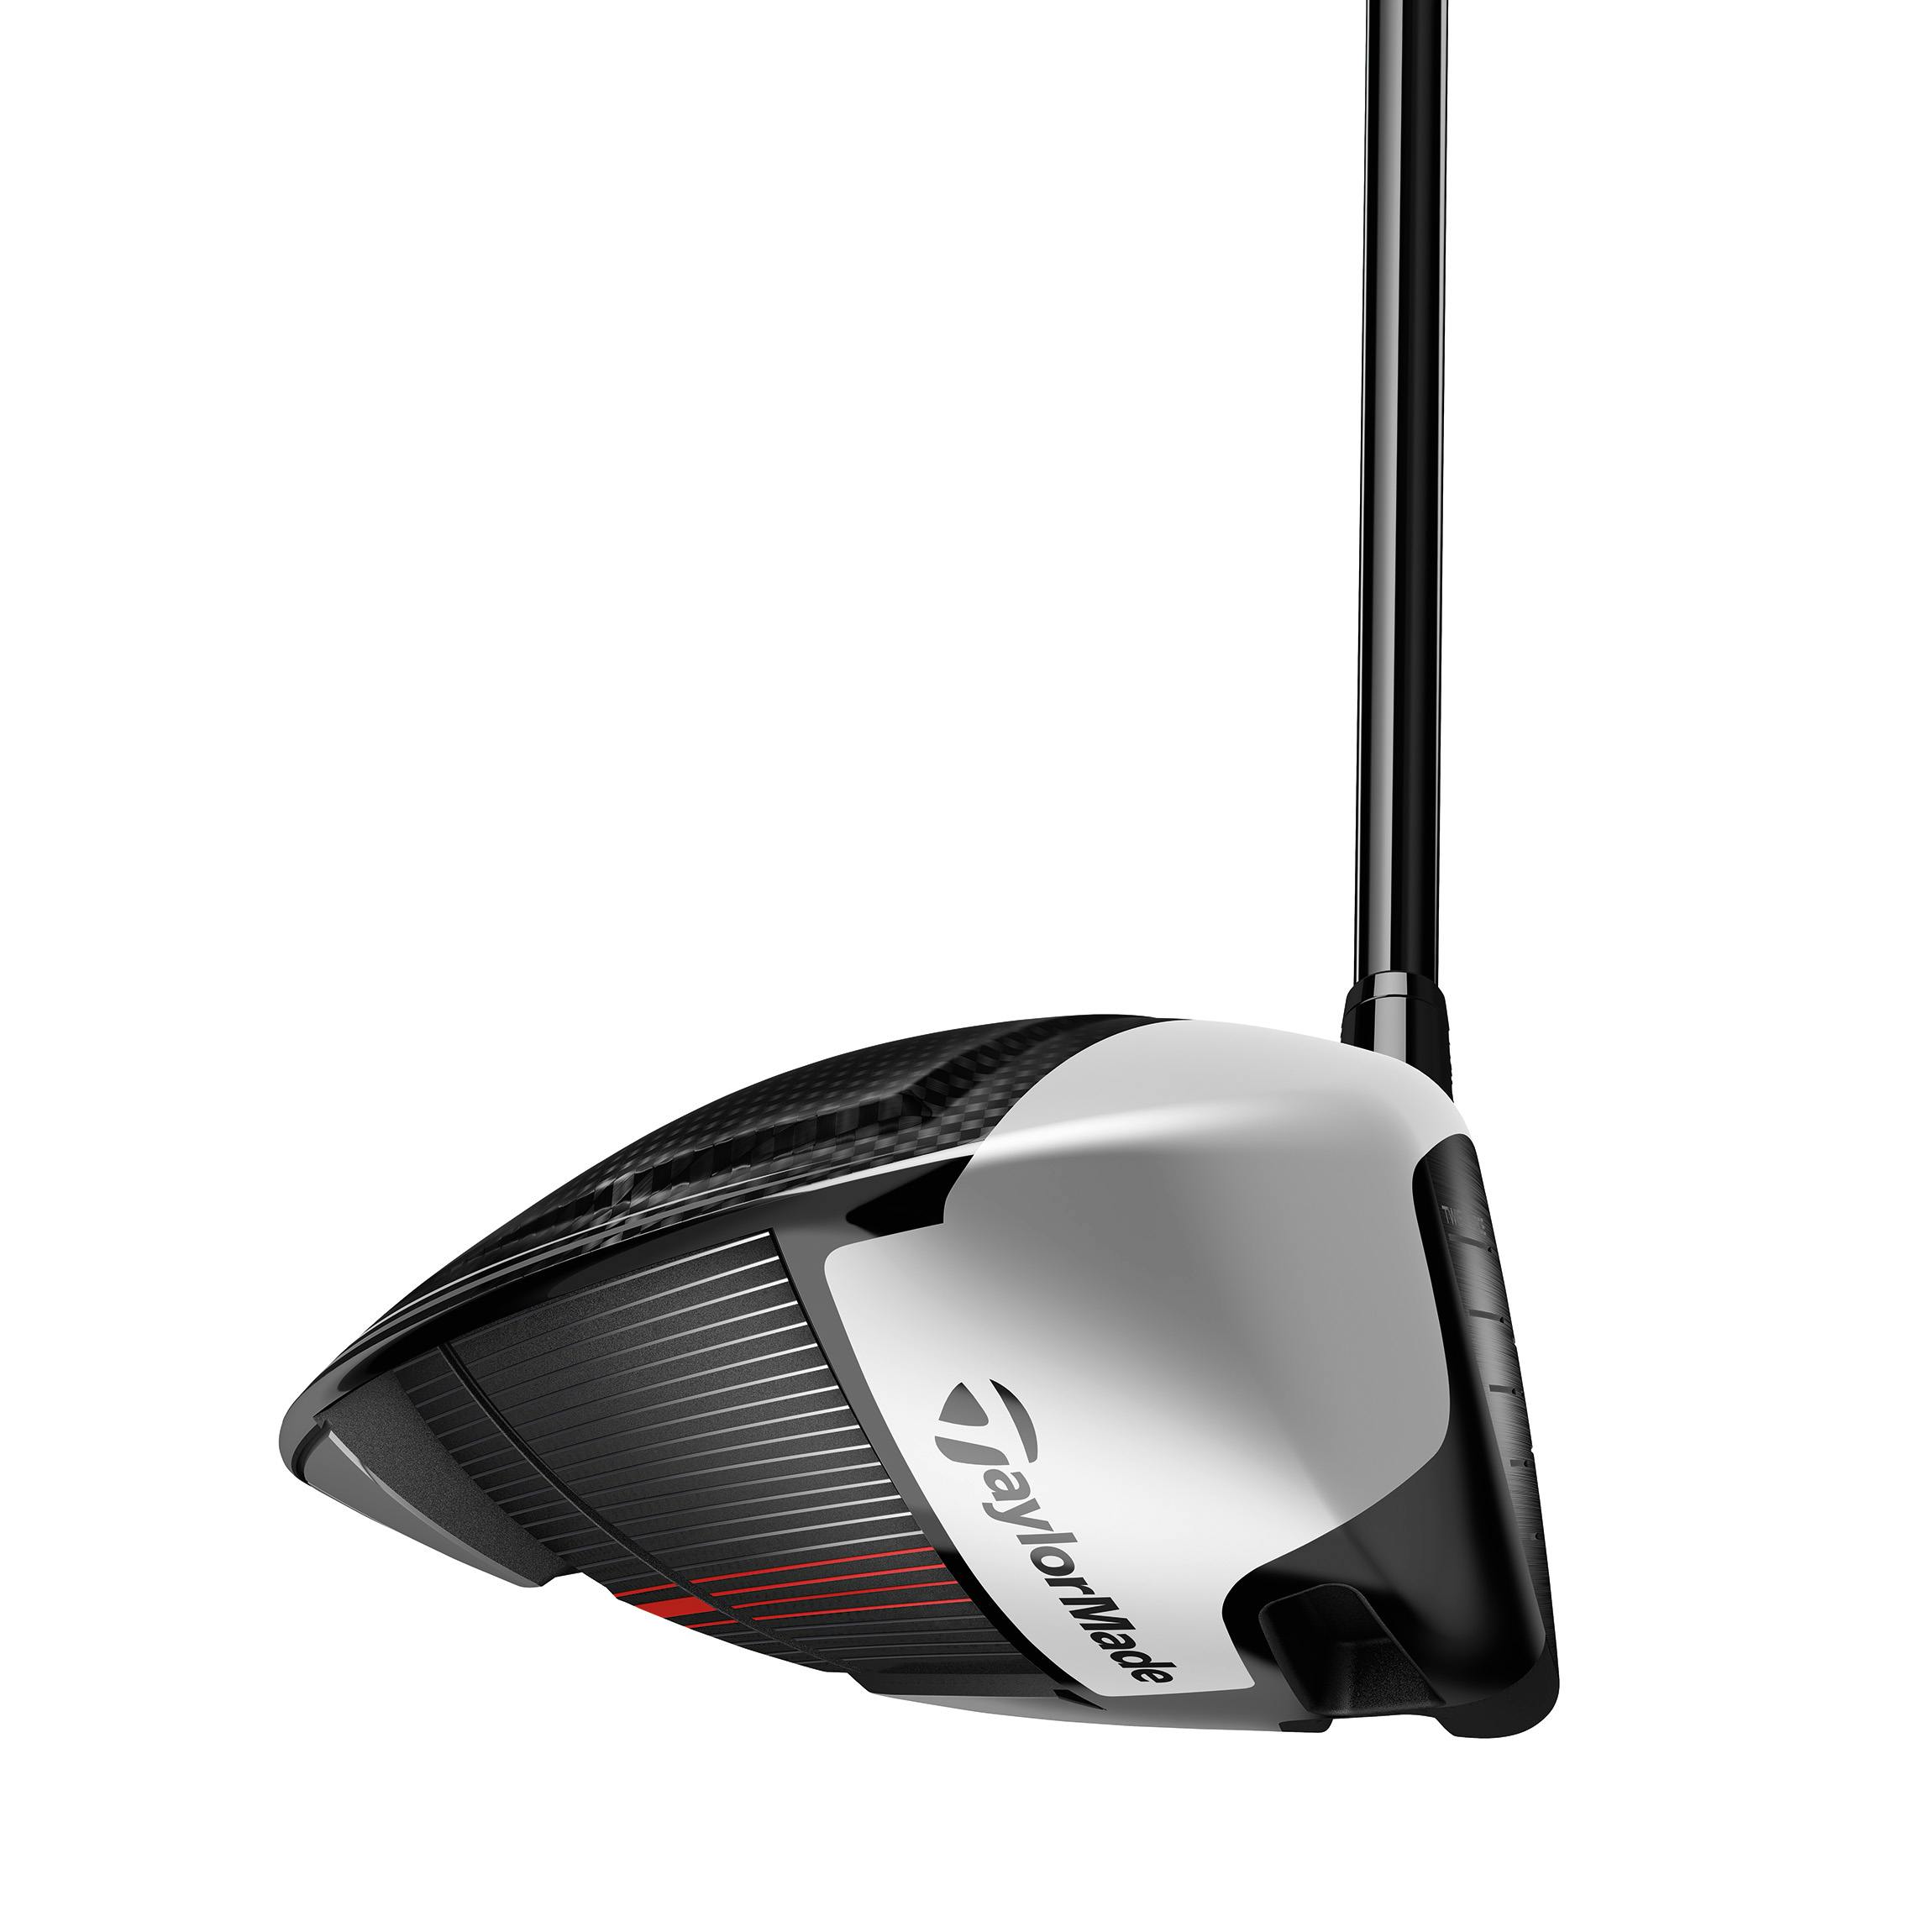 TaylorMade M4 Driver · Right handed · Stiff · 10.5°